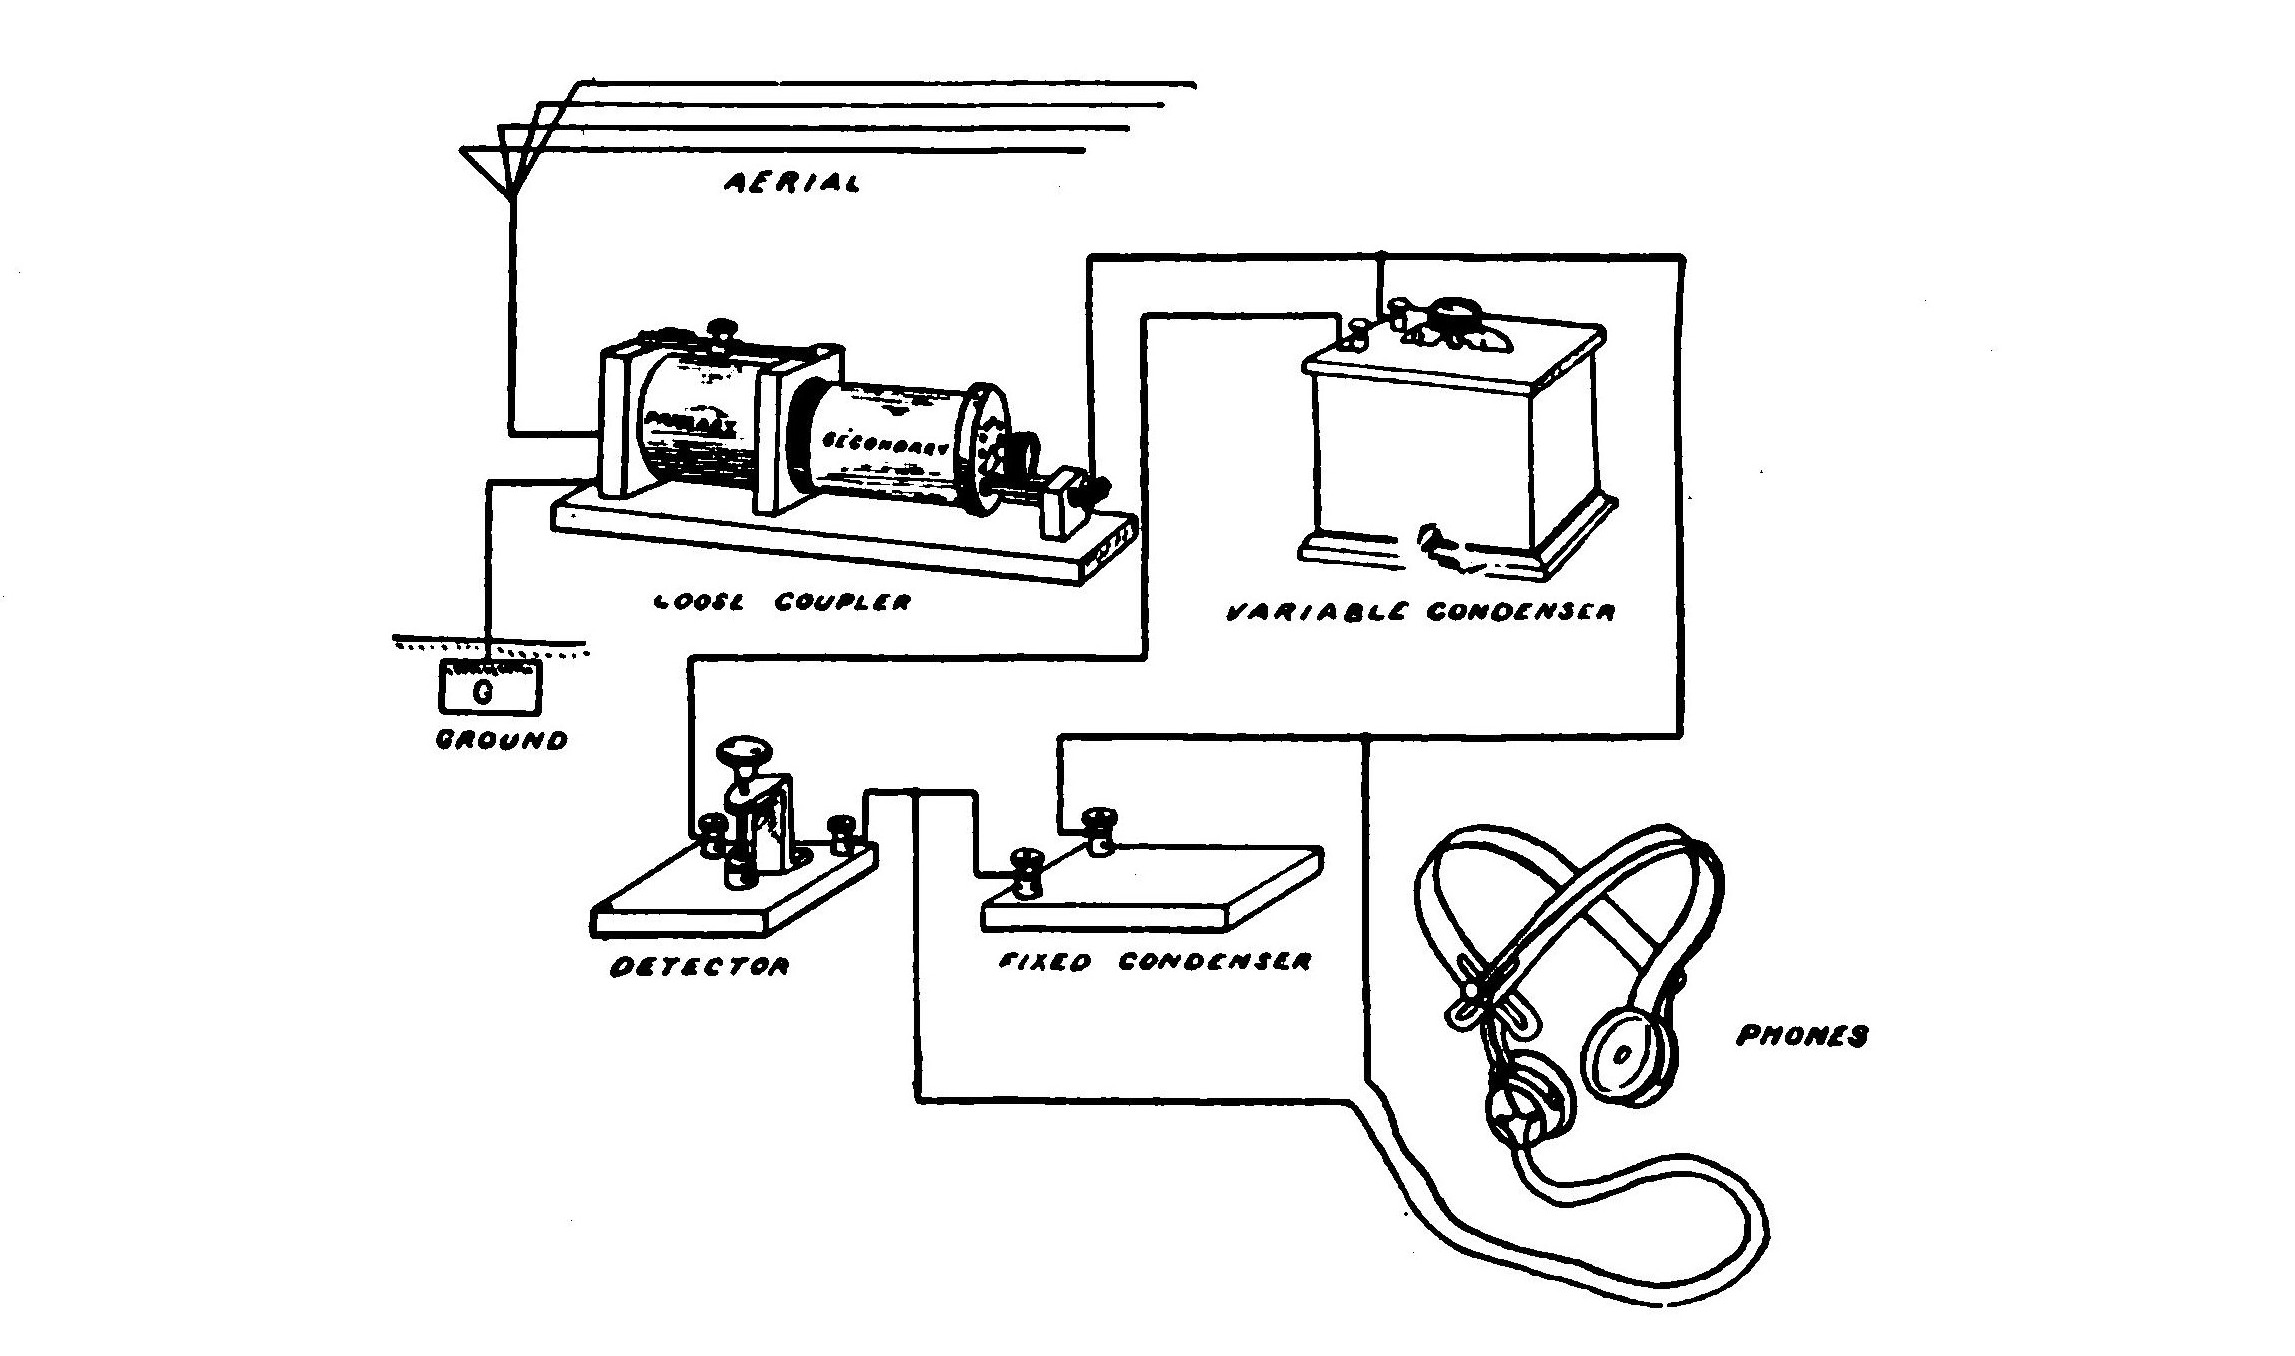 FIG. 85.—Diagram showing arrangement of rotary variable condenser in receiving circuit.